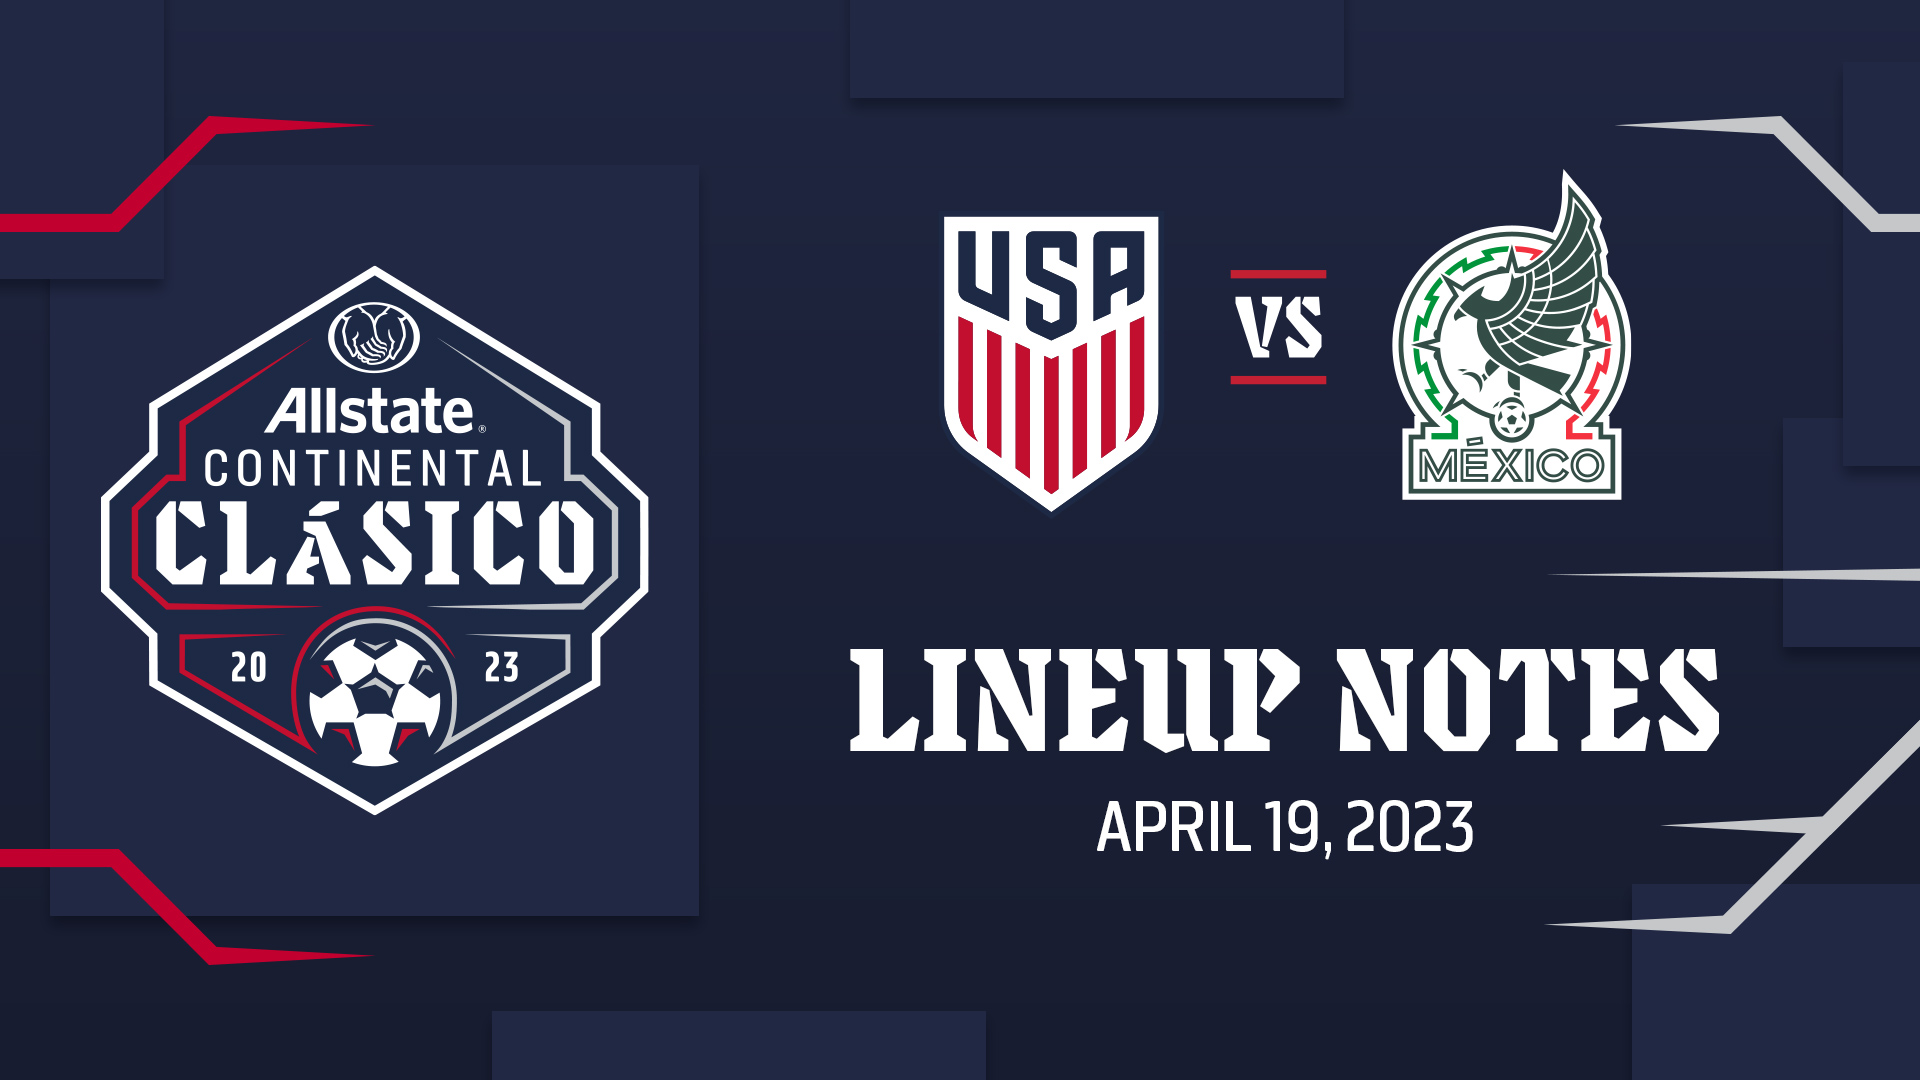 A Clash of Giants: USA vs. Mexico - A Spectacular Showdown of Soccer Supremacy